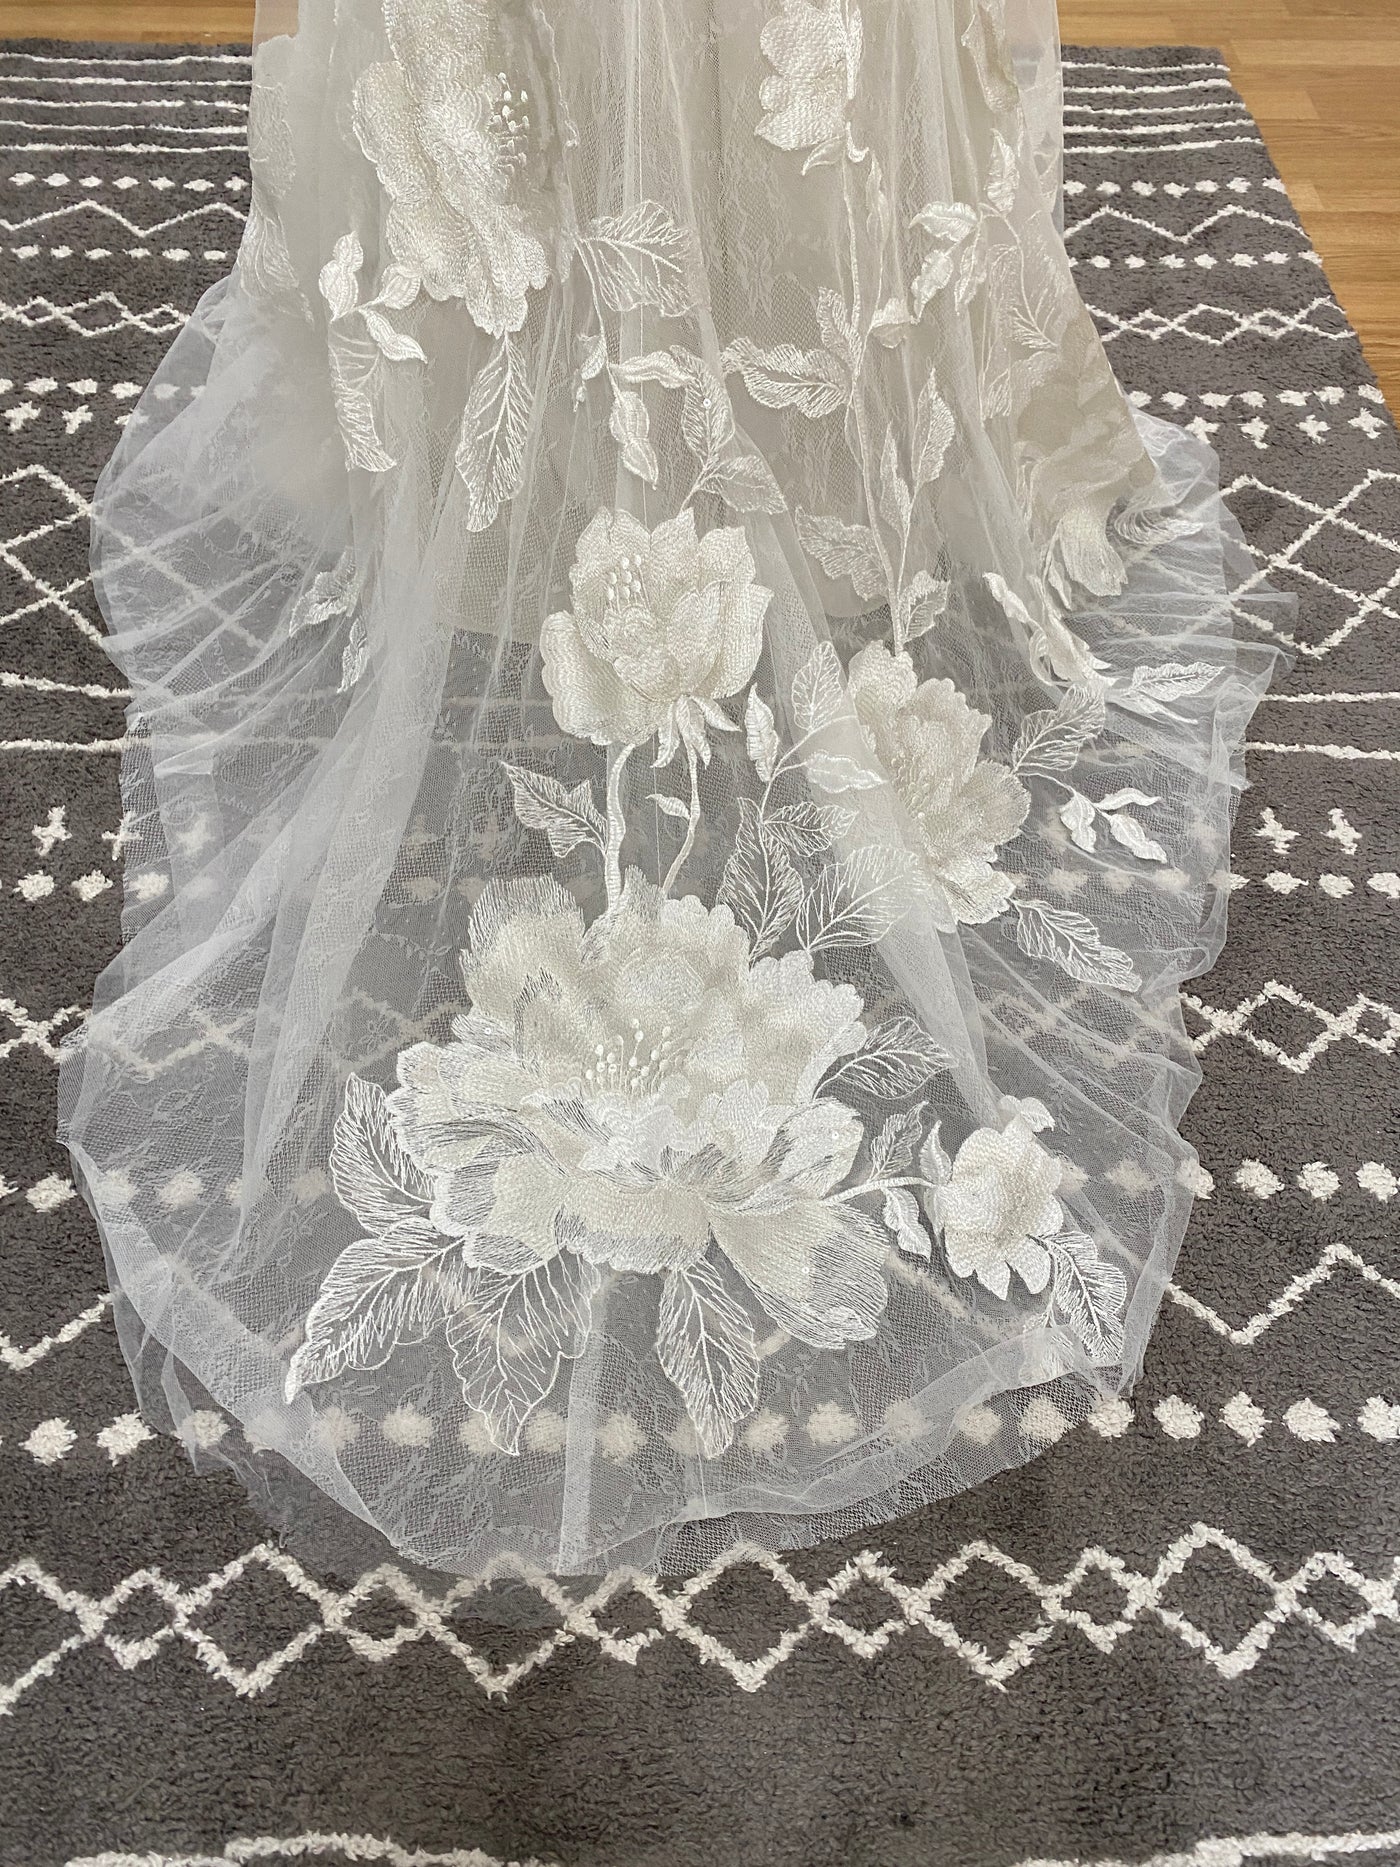 A white Willowby by Watter Honor 52122 bridal veil with floral motifs laid on a gray and white patterned Bergamot Bridal rug.